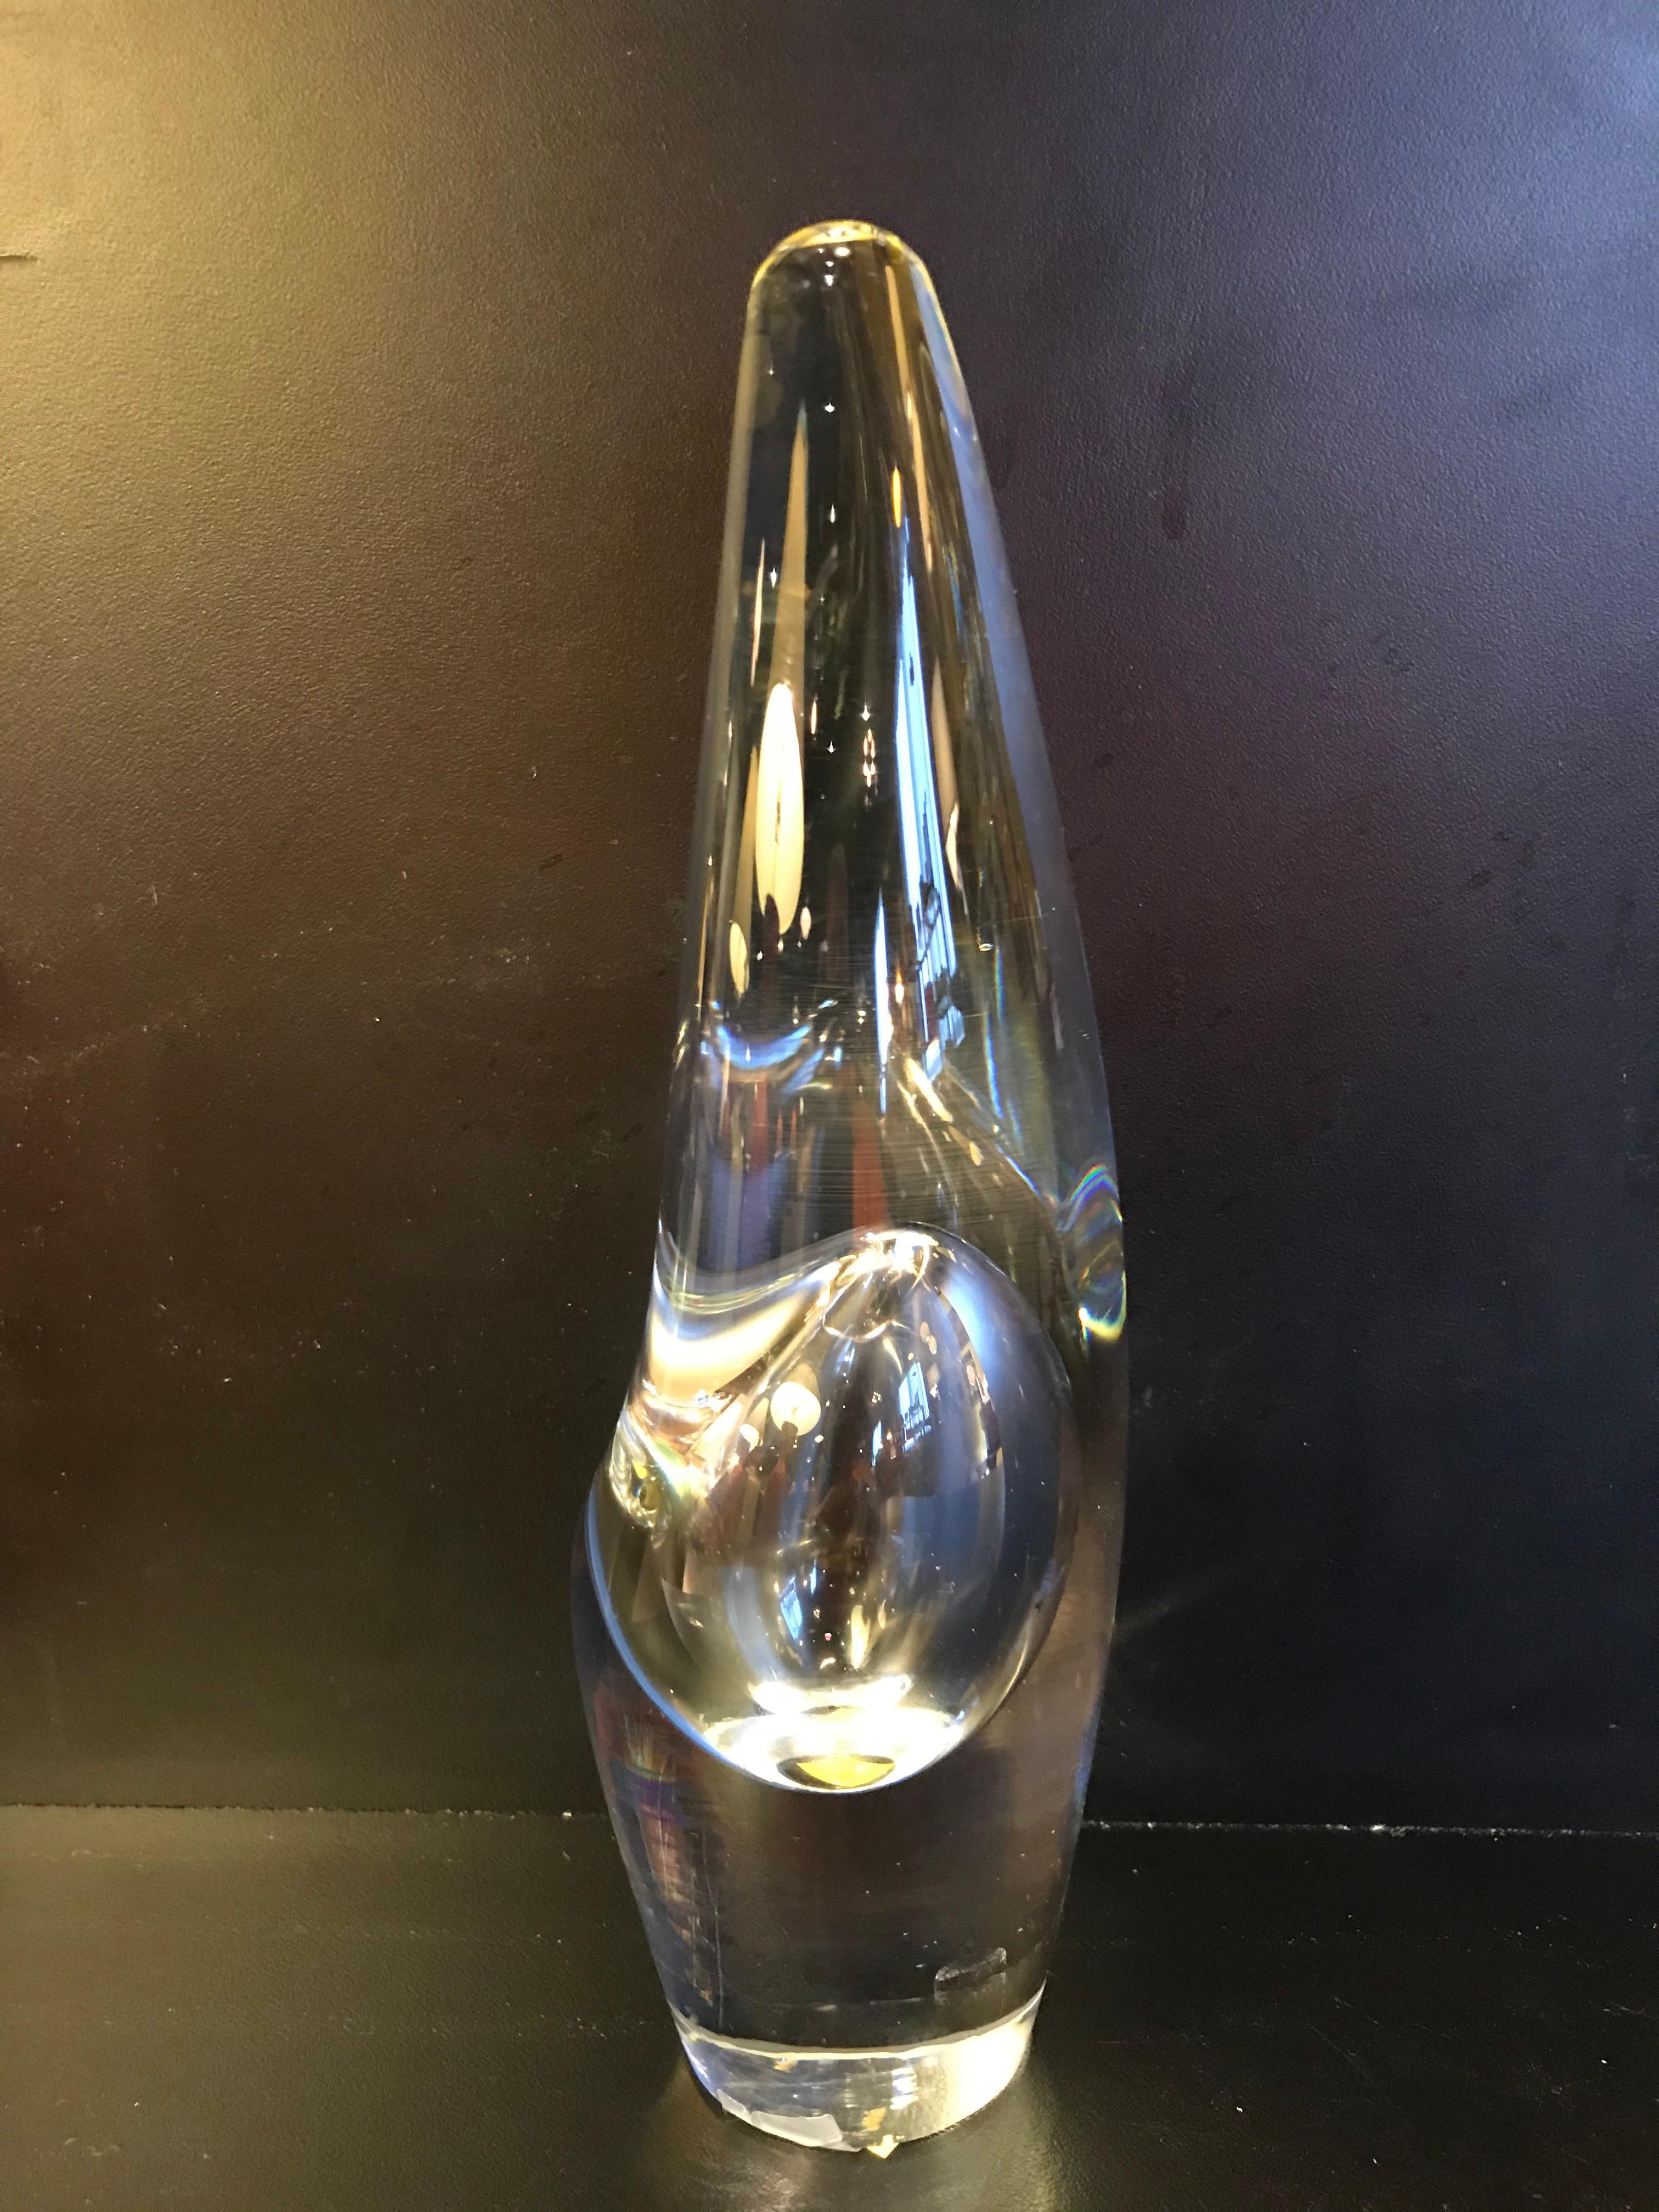 Finnish Scandinavian Modern Blown Glass Orchid Vase 1987 by Timo Sarpaneva, Finland For Sale